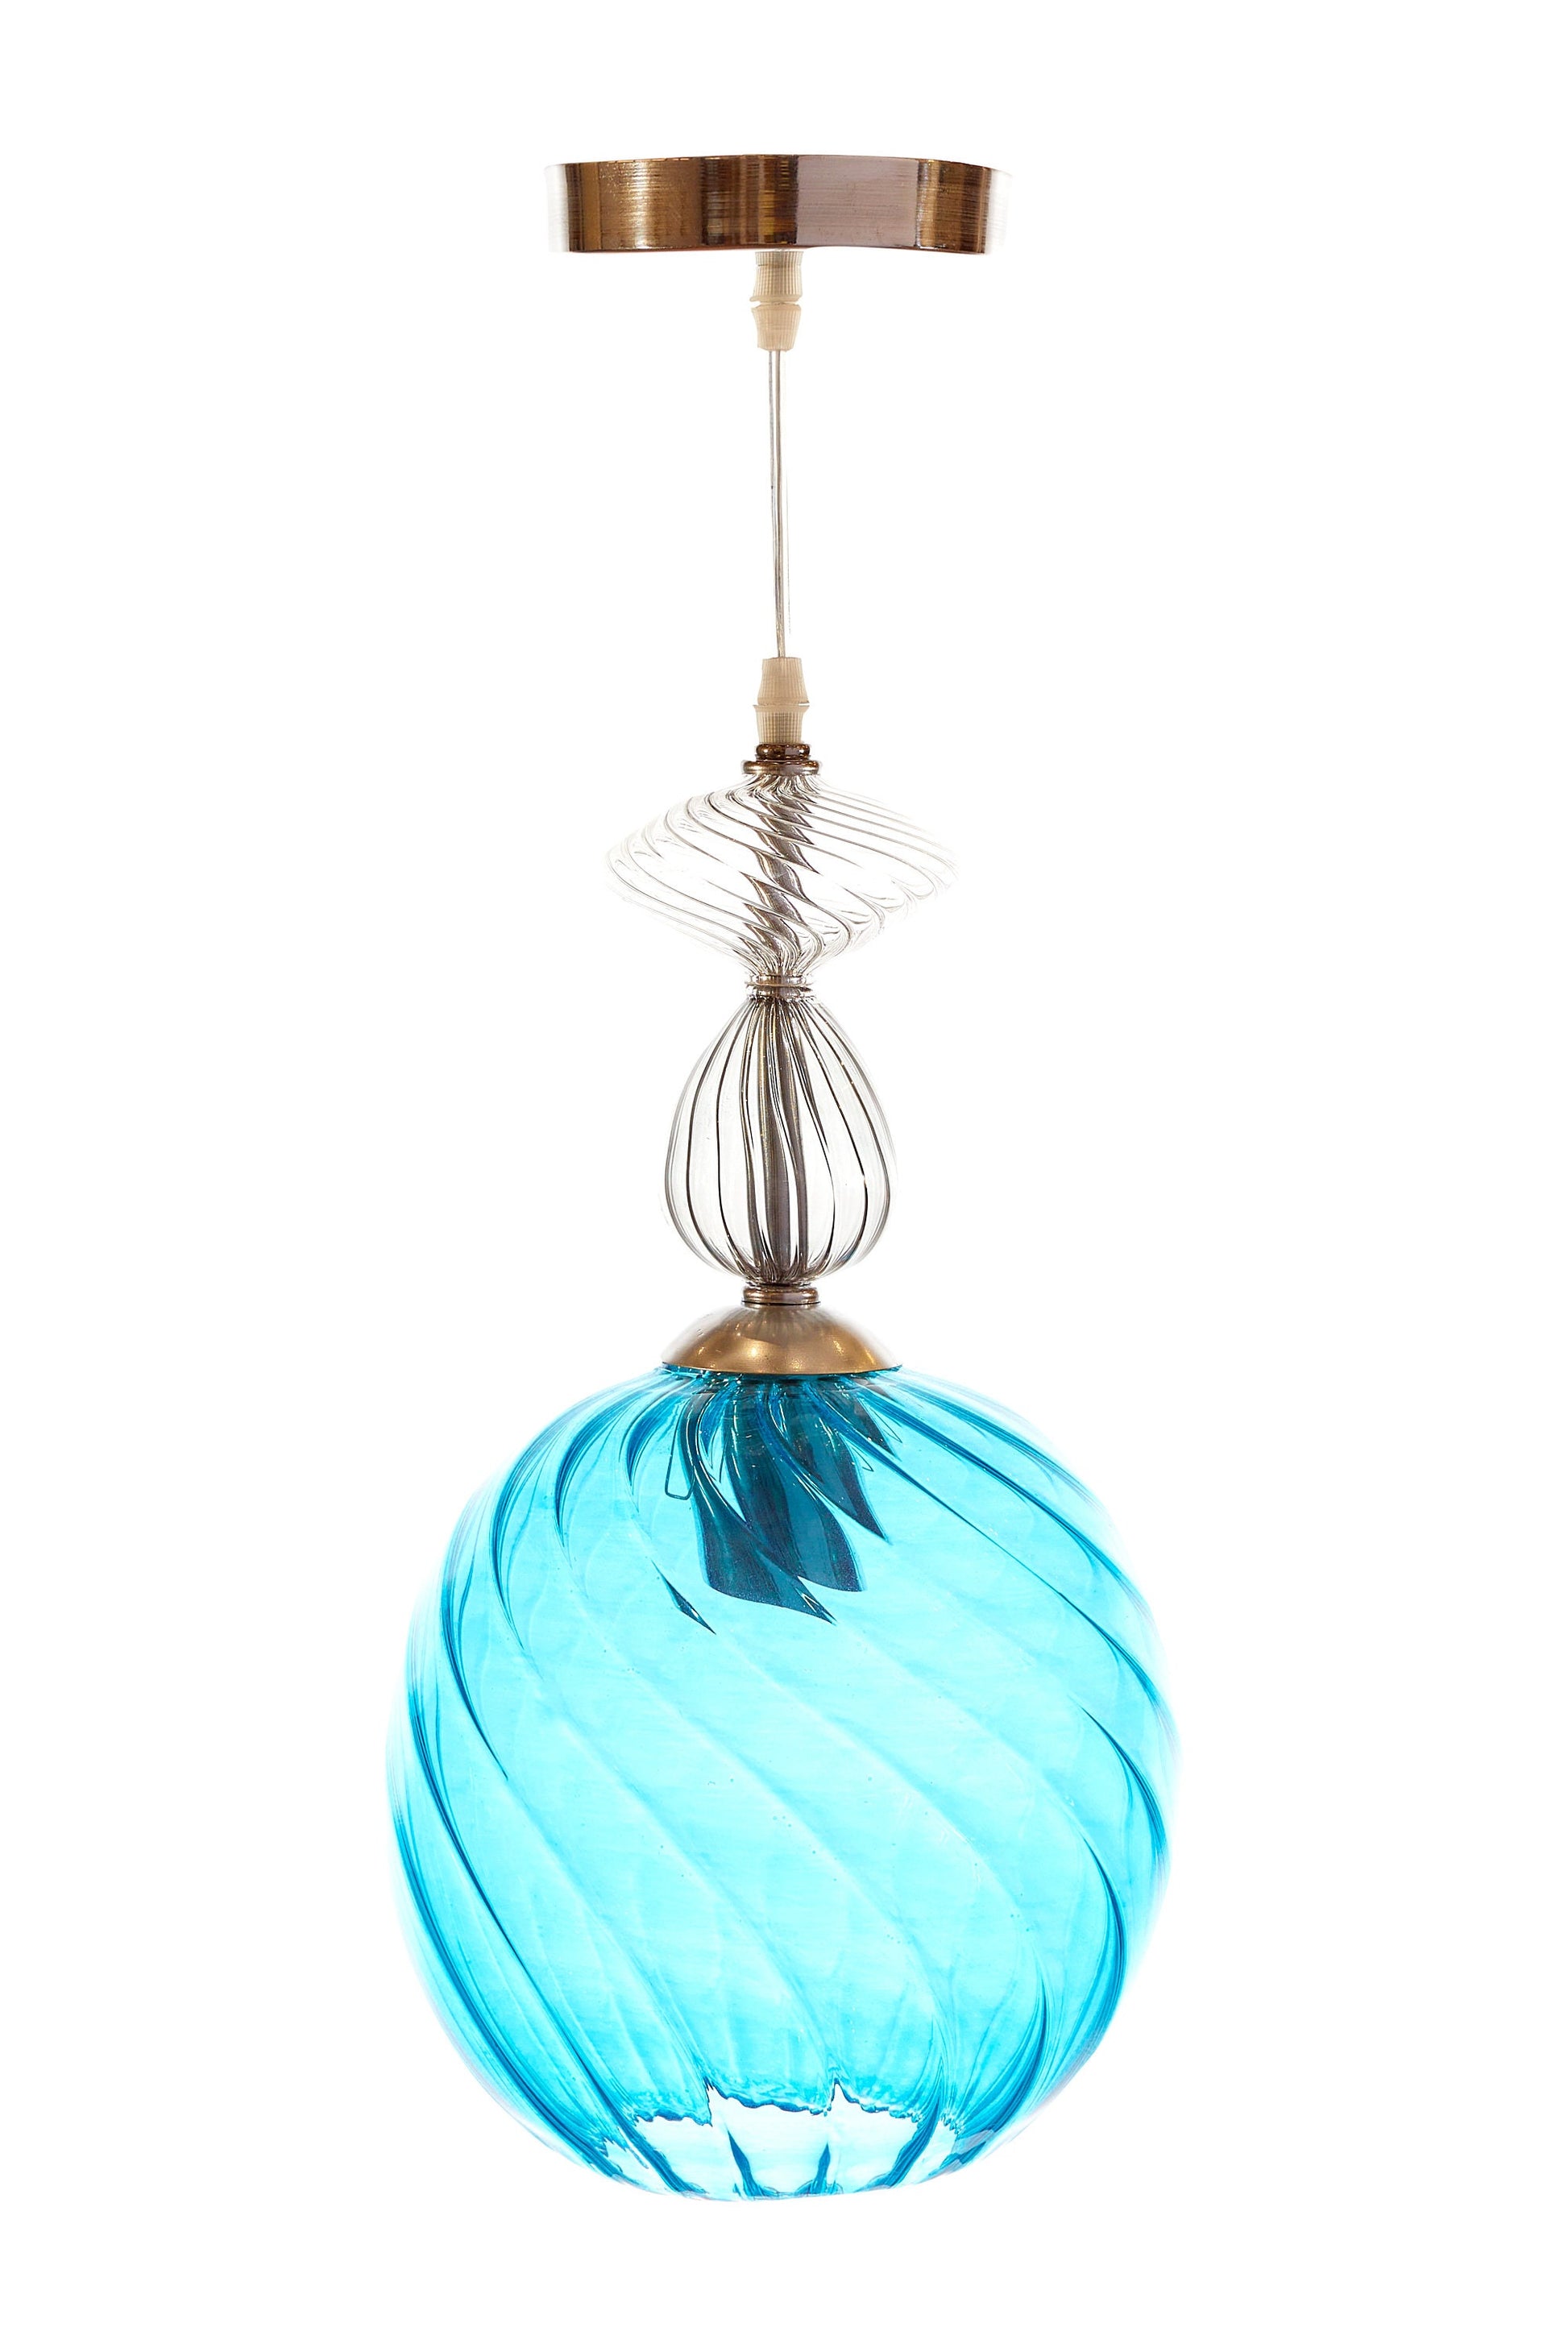 Swirl Ribbed Glass Light Fixture for Room Decor - Les Trois Pyramides